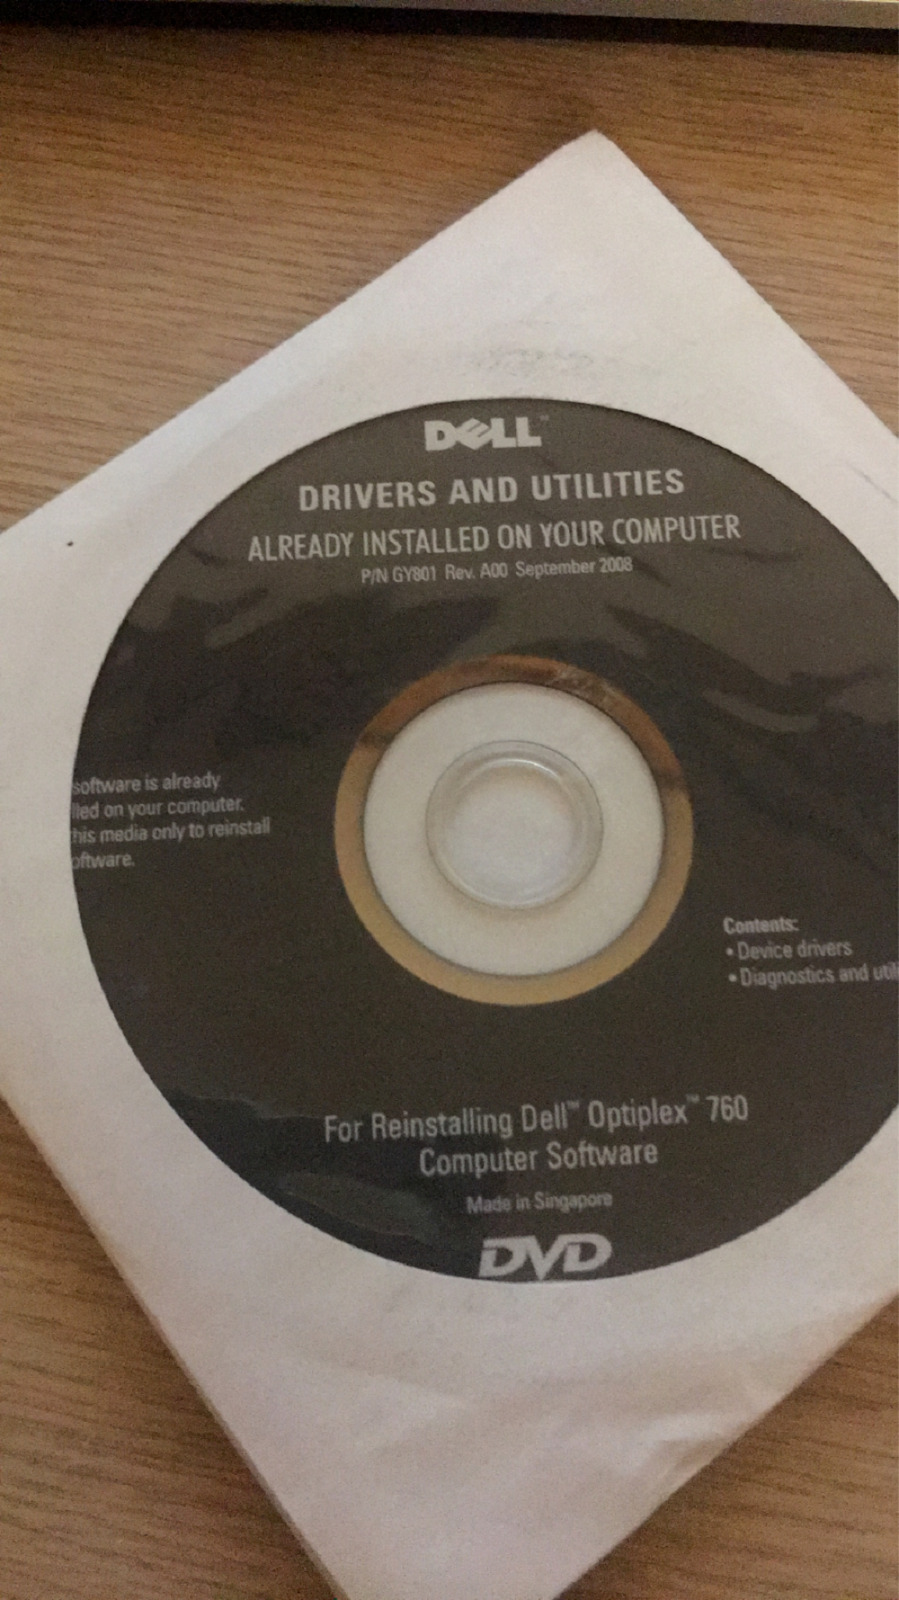 Dell Drivers and Utilities   September 2008 for Reinstalling Dell Optiplex 760 